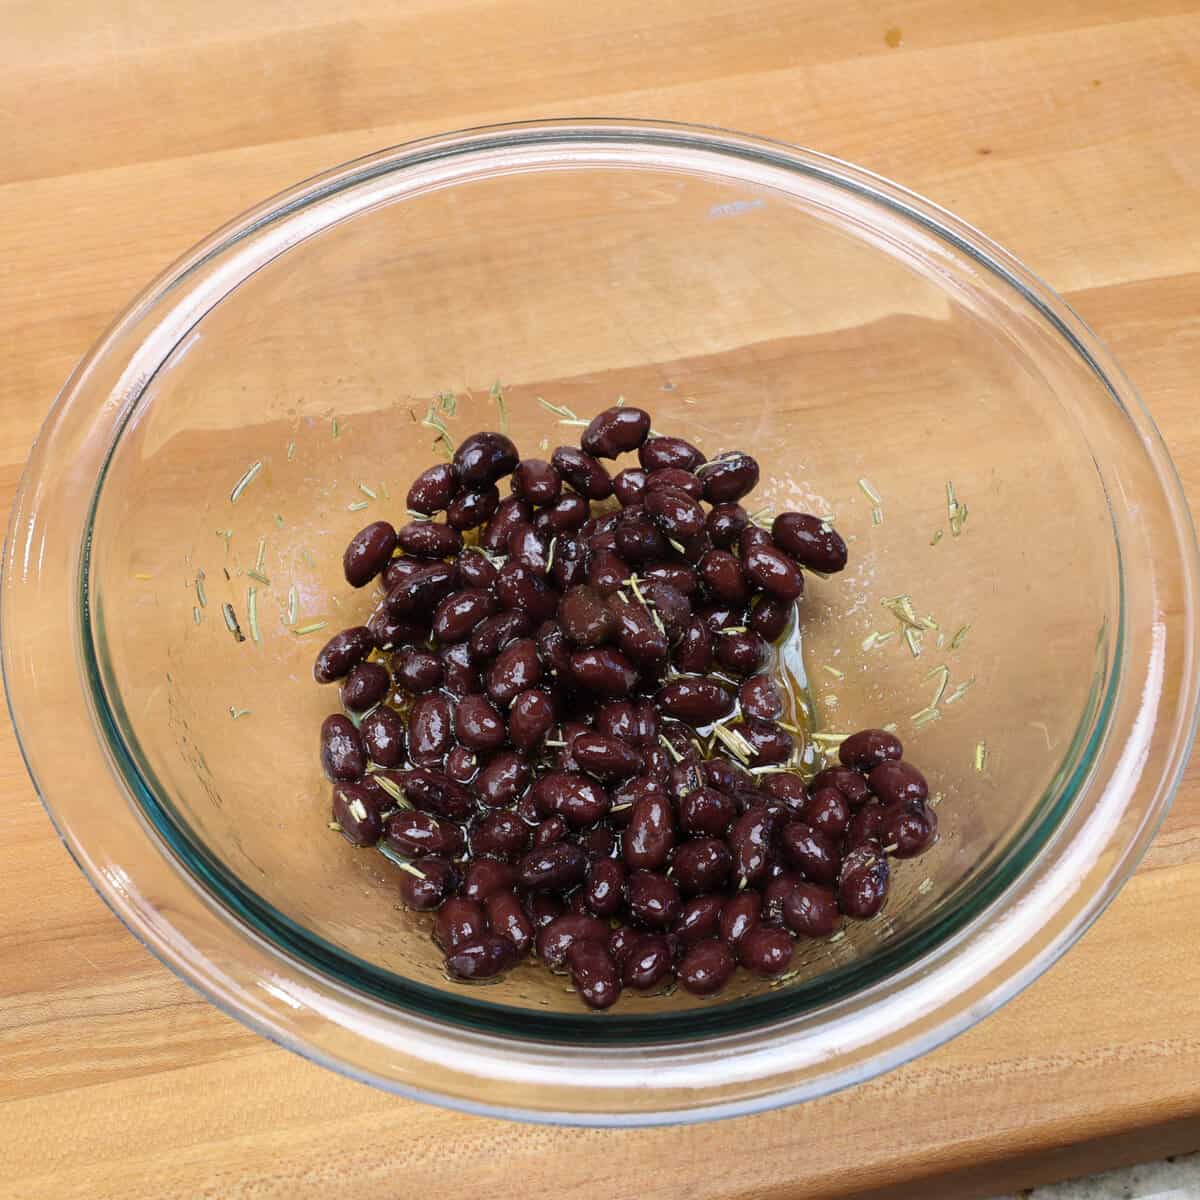 black beans tossed with a vinaigrette in a small bowl.